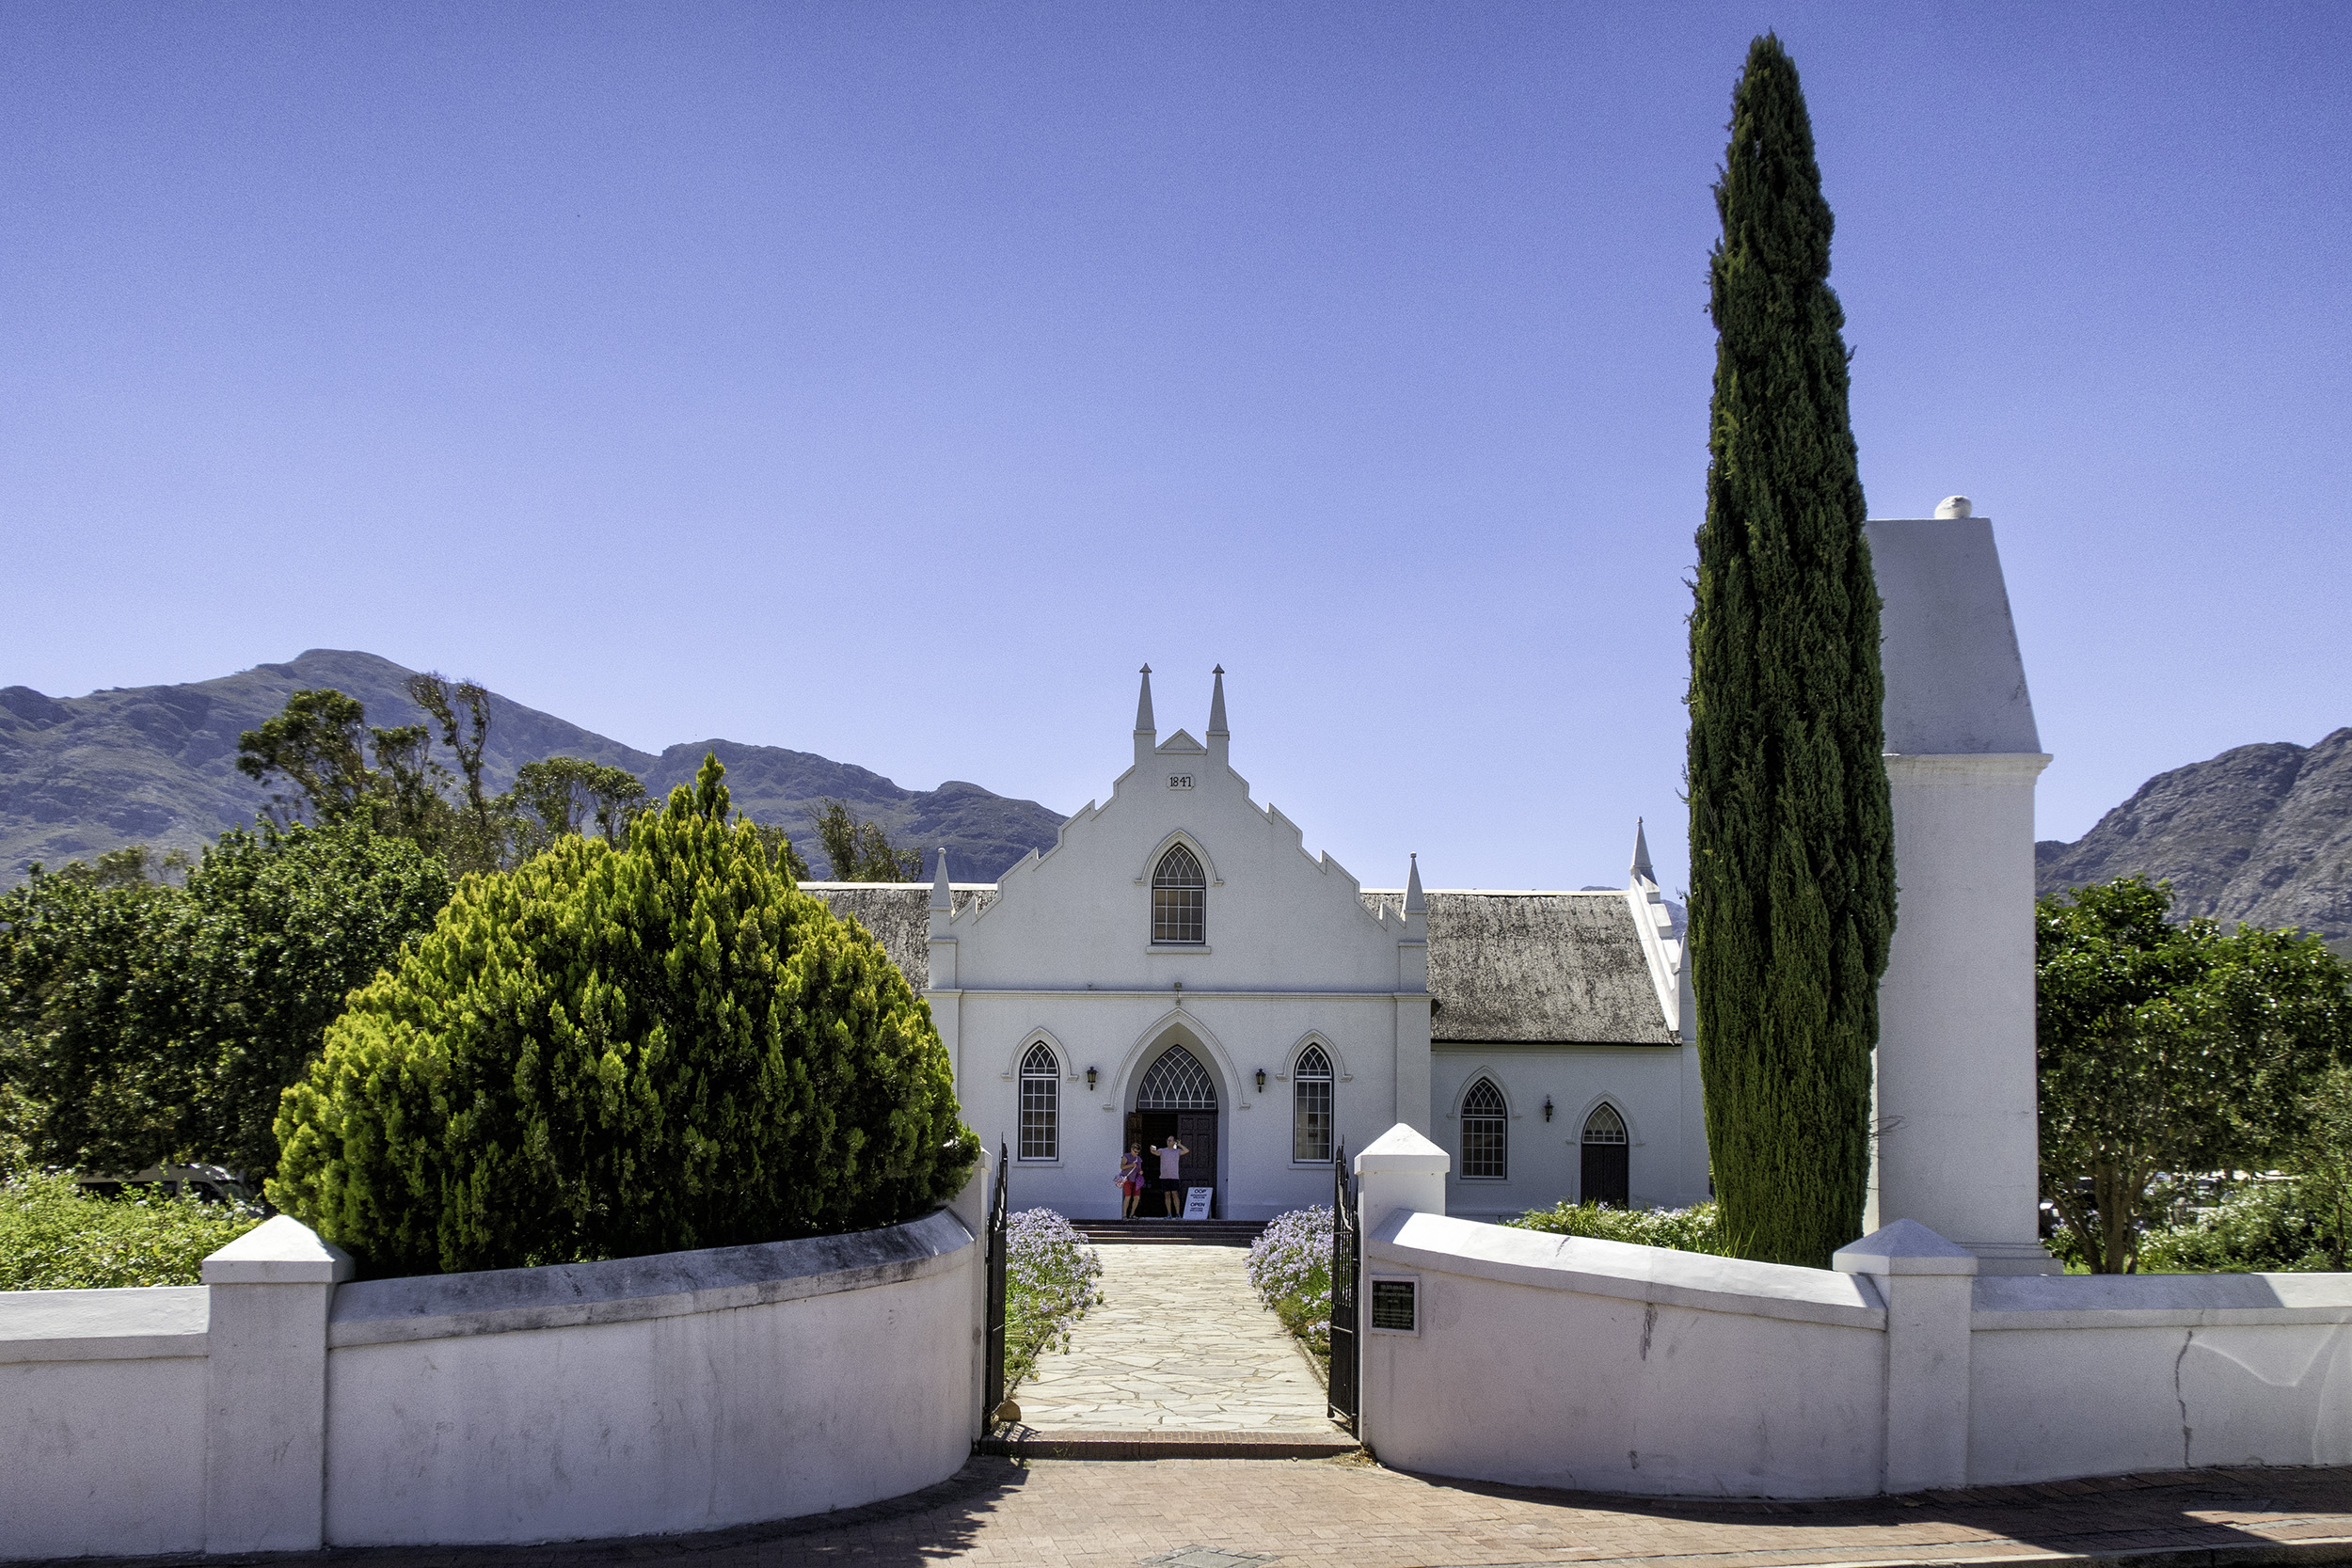 Franschhoek, SA, February Afternoon